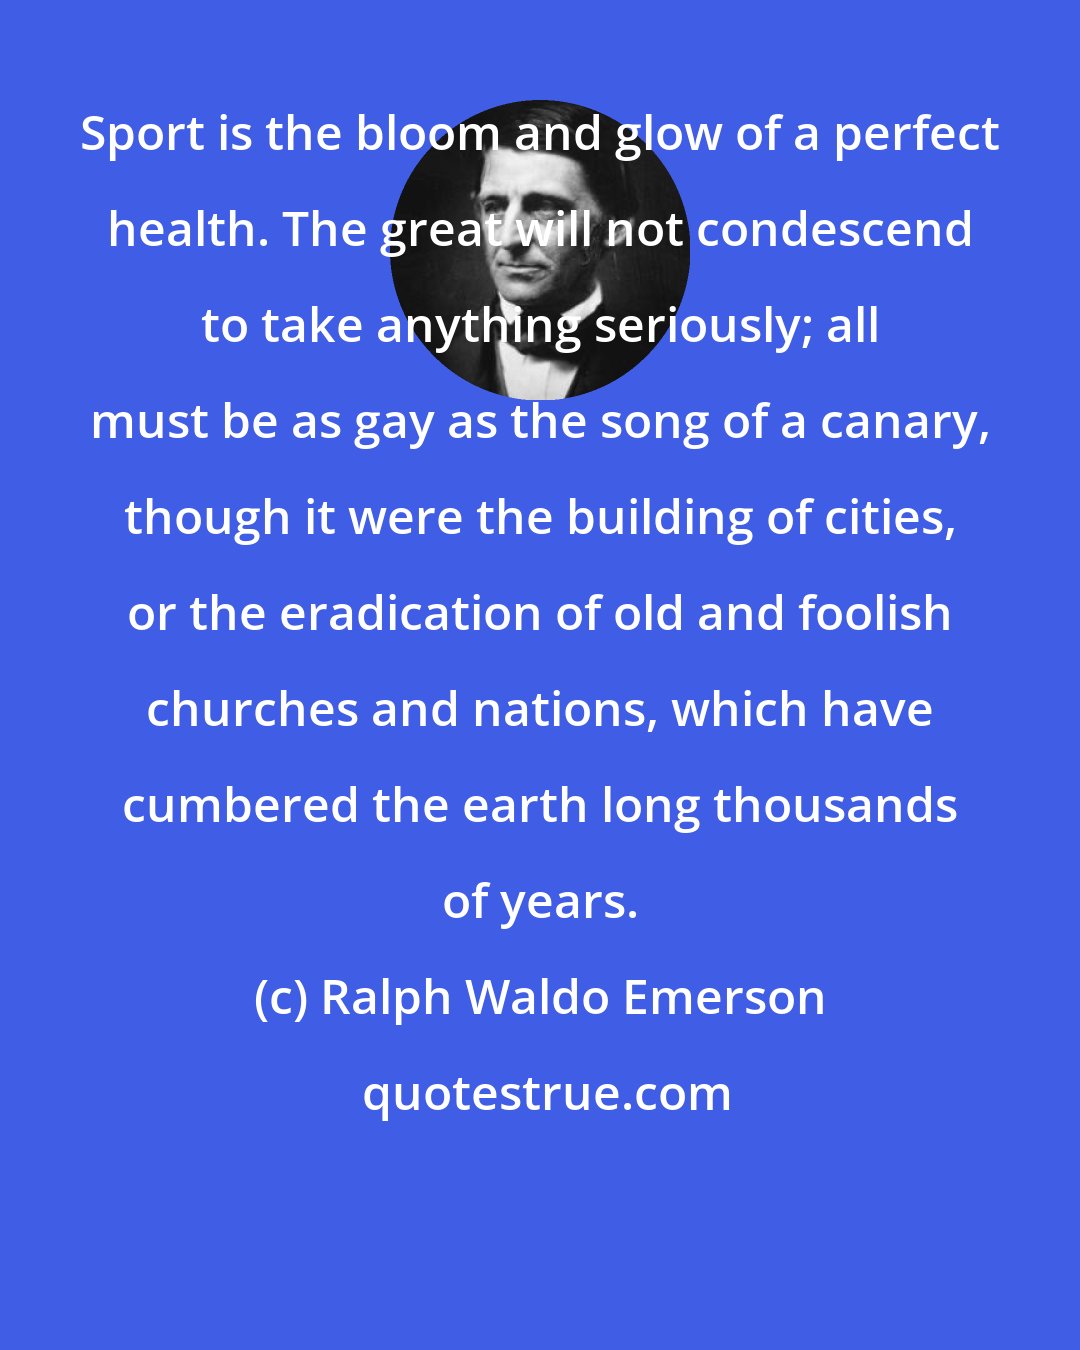 Ralph Waldo Emerson: Sport is the bloom and glow of a perfect health. The great will not condescend to take anything seriously; all must be as gay as the song of a canary, though it were the building of cities, or the eradication of old and foolish churches and nations, which have cumbered the earth long thousands of years.